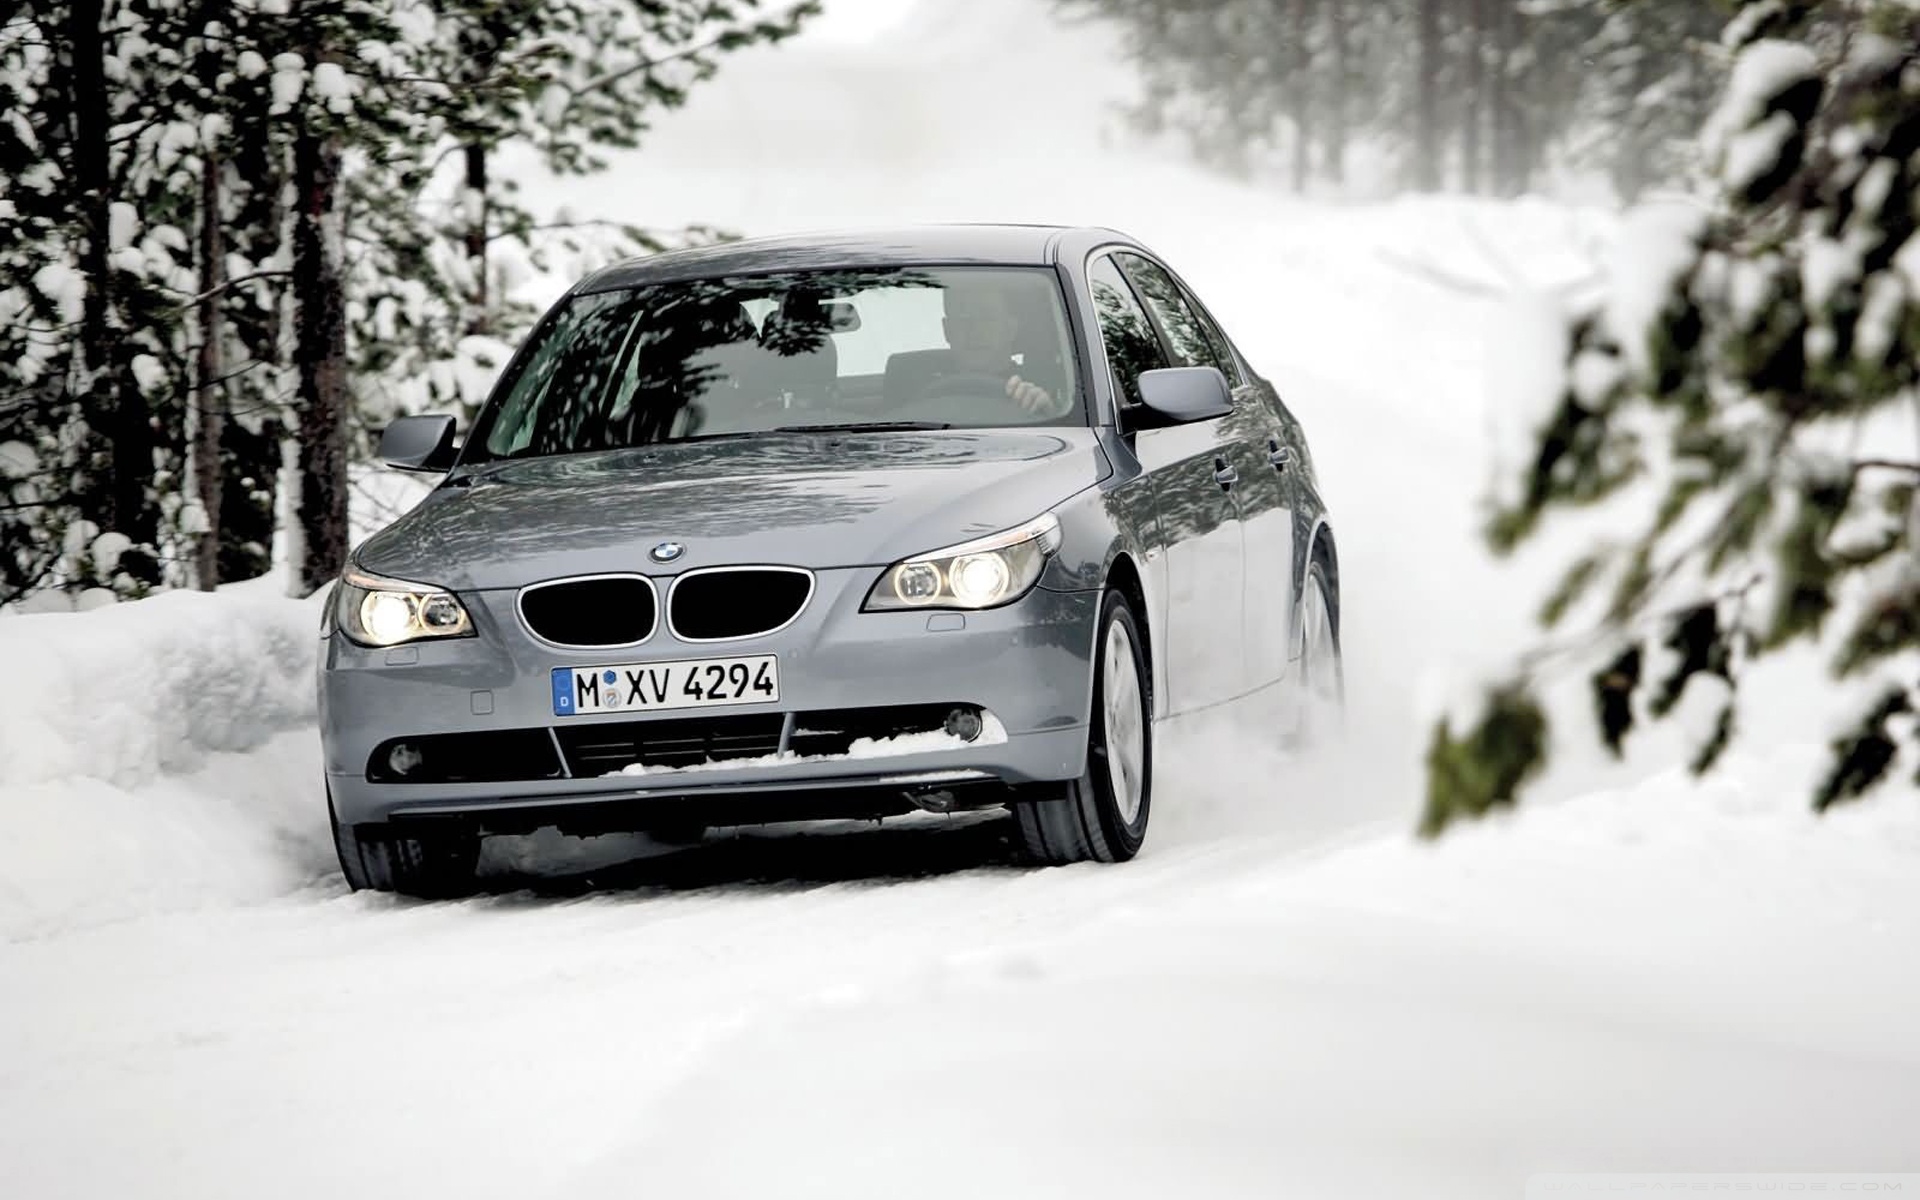 Bmw In The Snow Ultra HD Desktop Background Wallpaper For 4k UHD